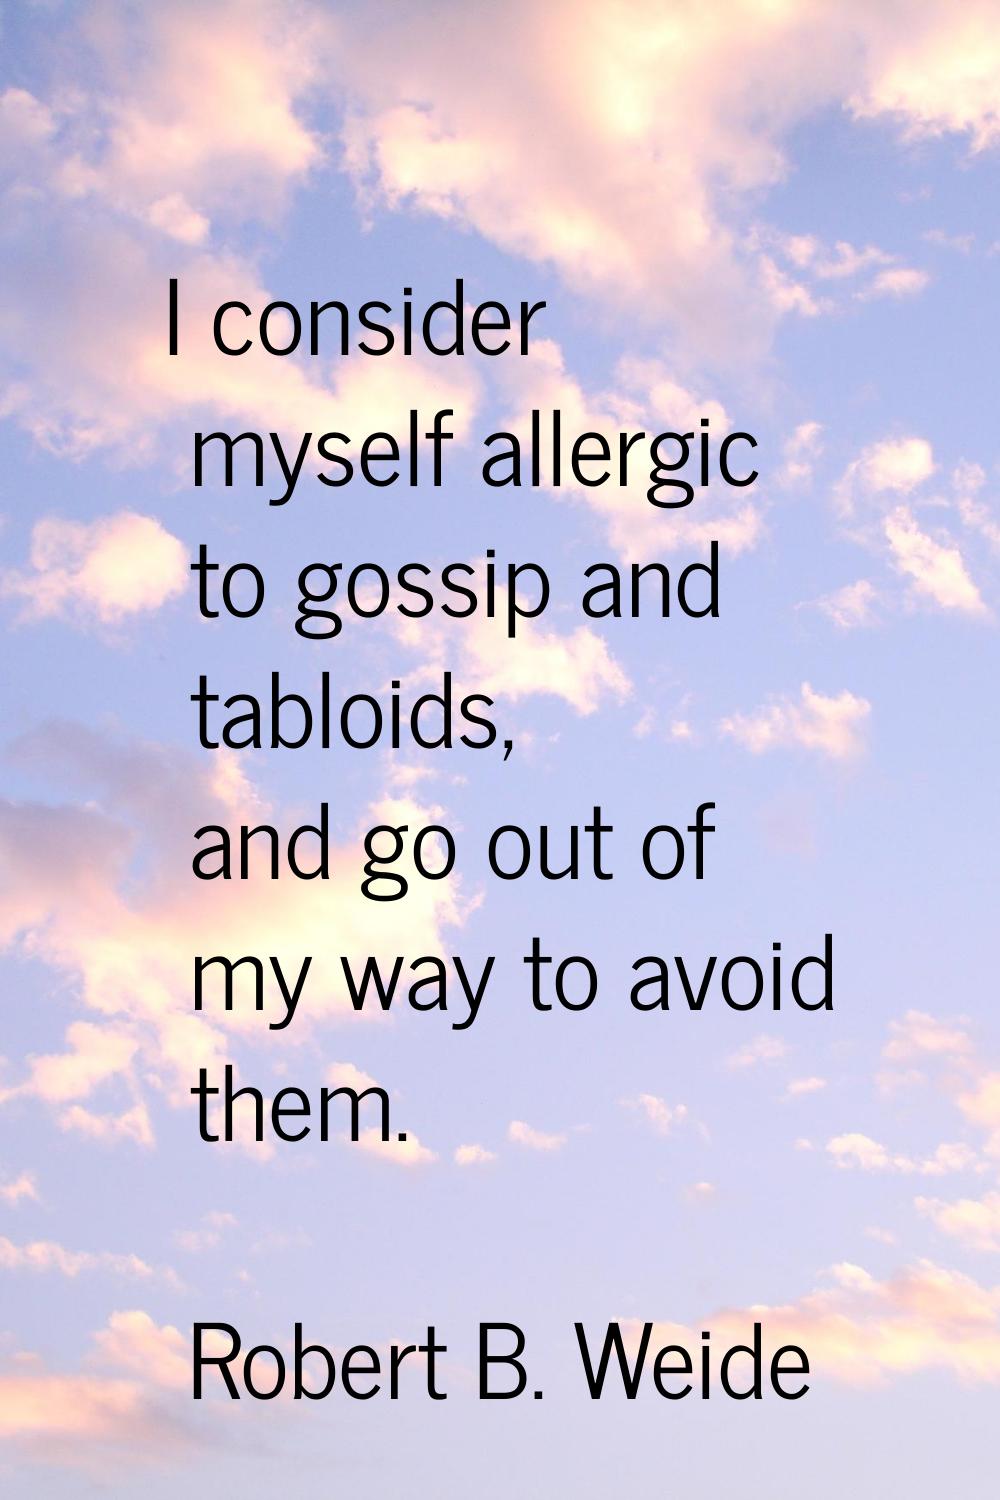 I consider myself allergic to gossip and tabloids, and go out of my way to avoid them.